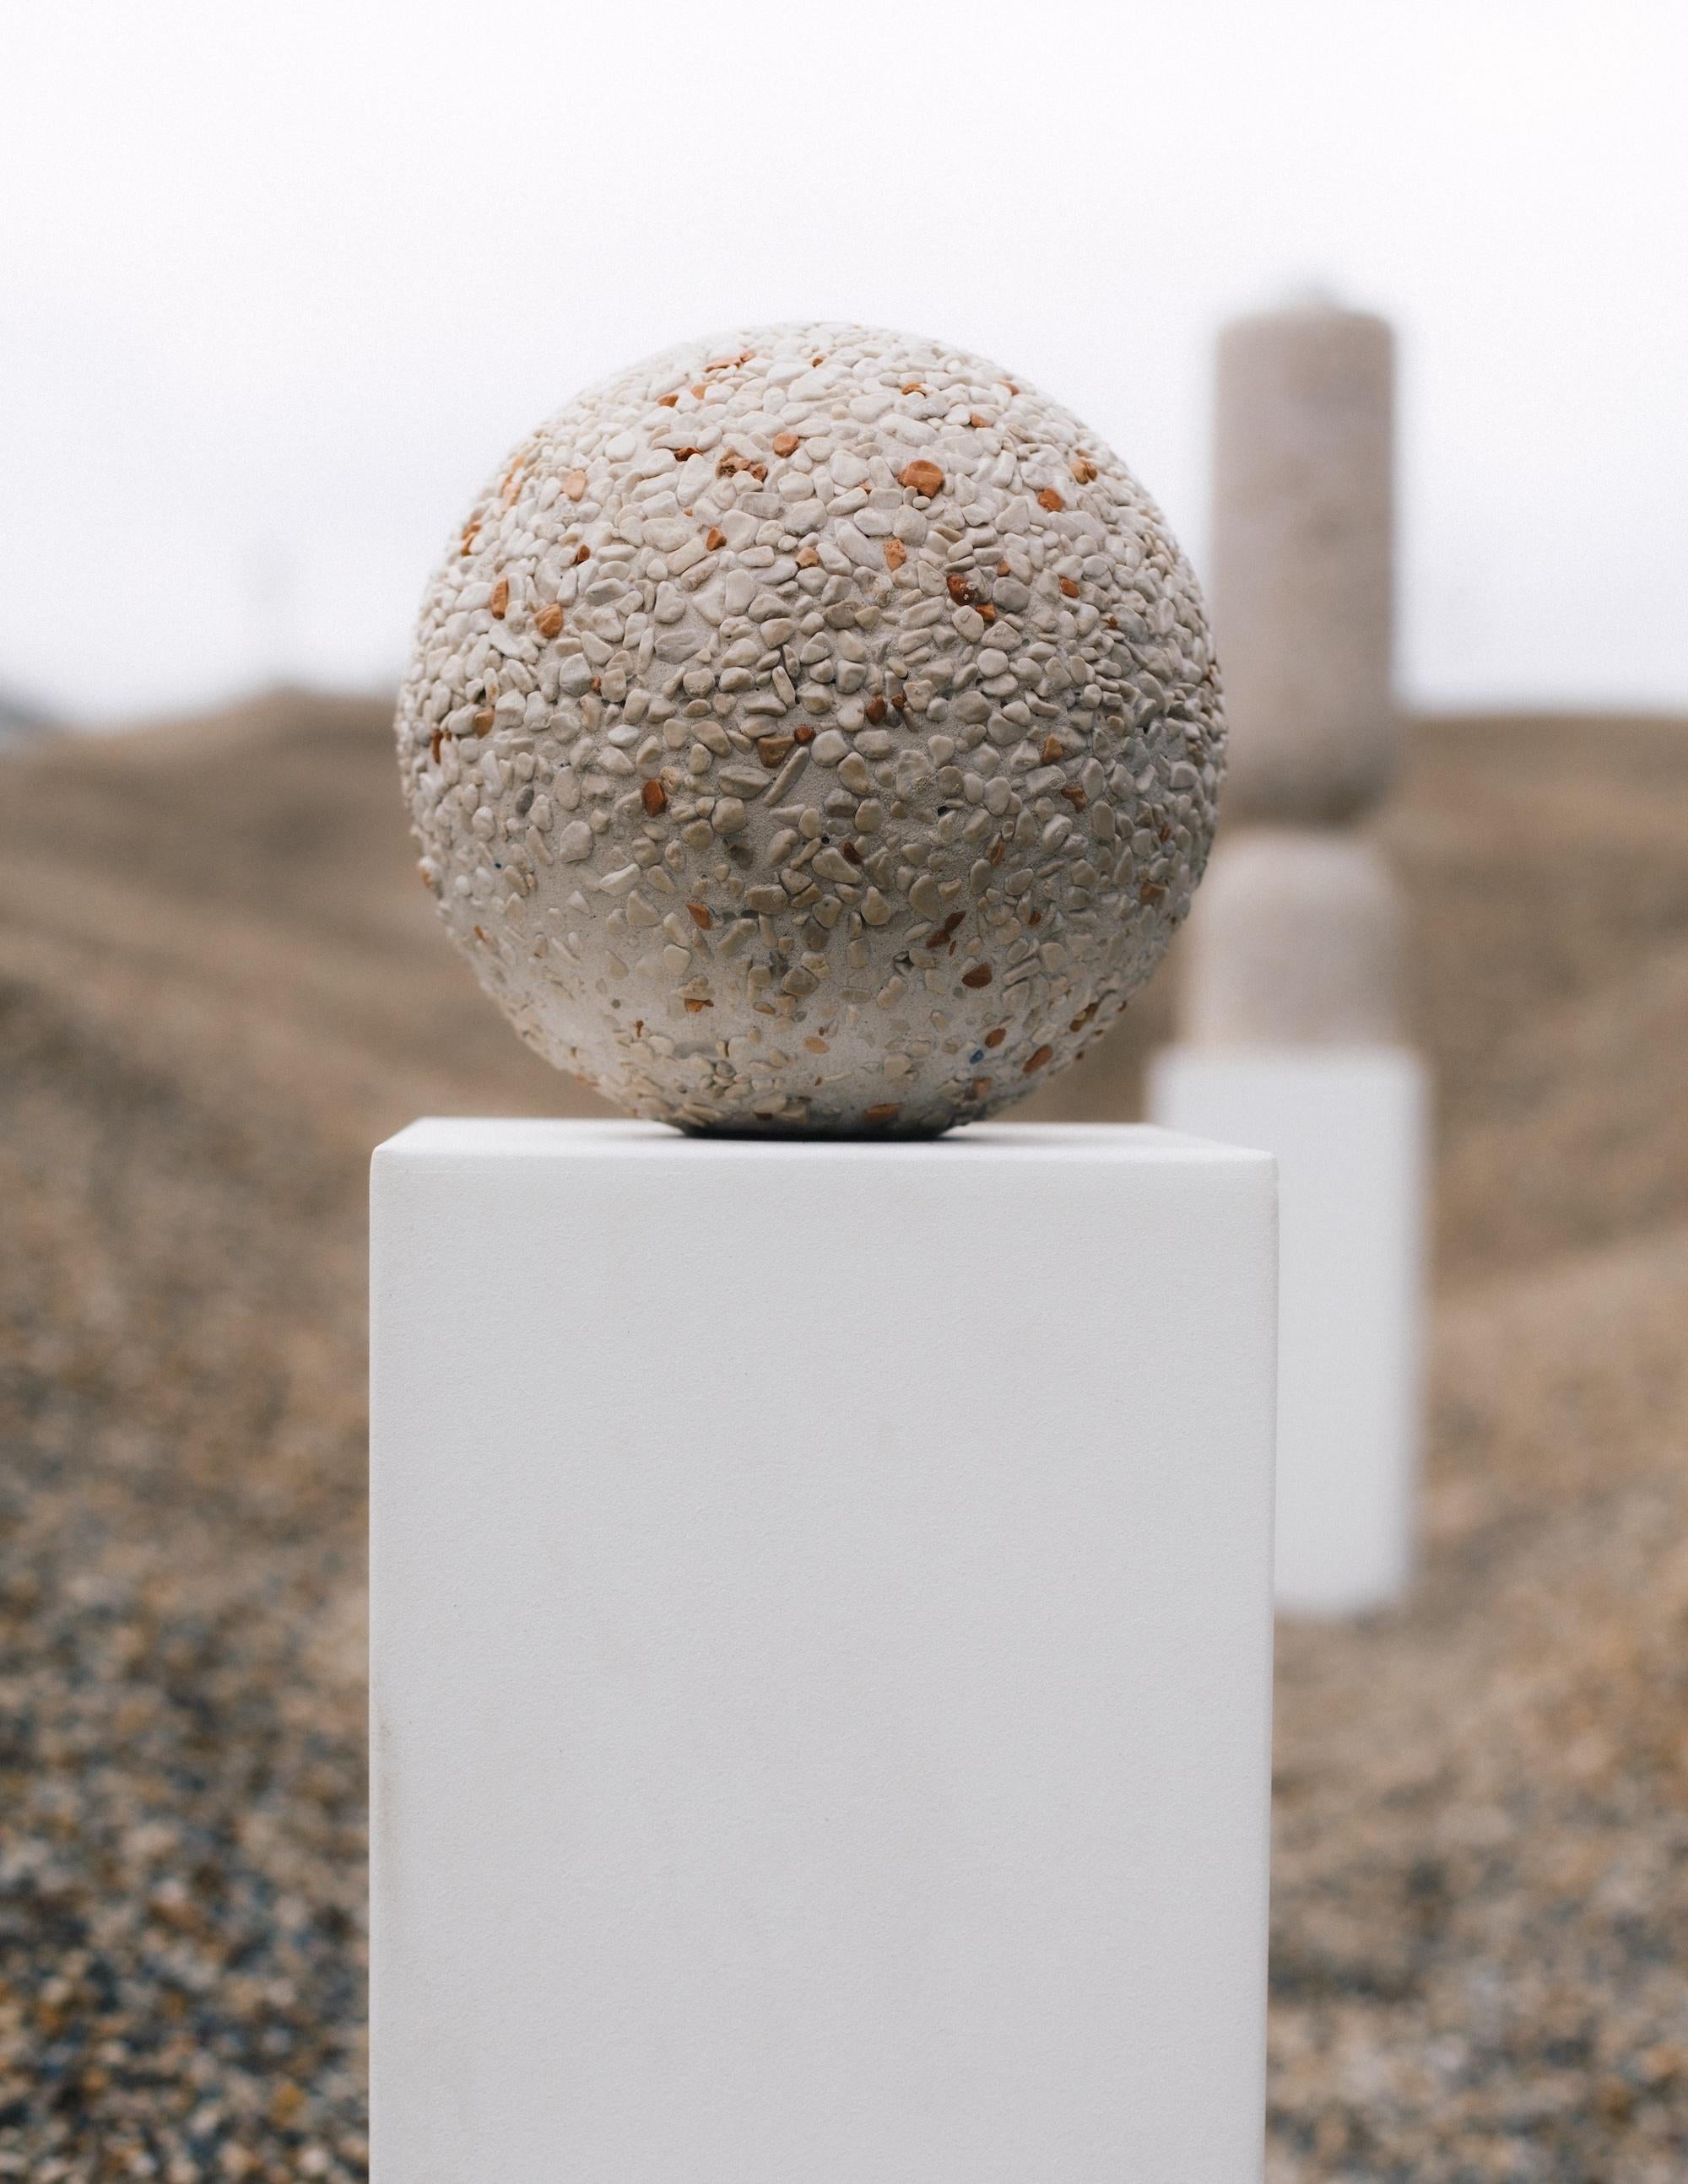 Ball Floor Sculpture by Vaust
Open Edition
Dimensions: 25 cm
Materials: solid exposed aggregate concrete
Also Available: Custom material selection can be offered upon request and after approval by designer.

The sphere brought up the other